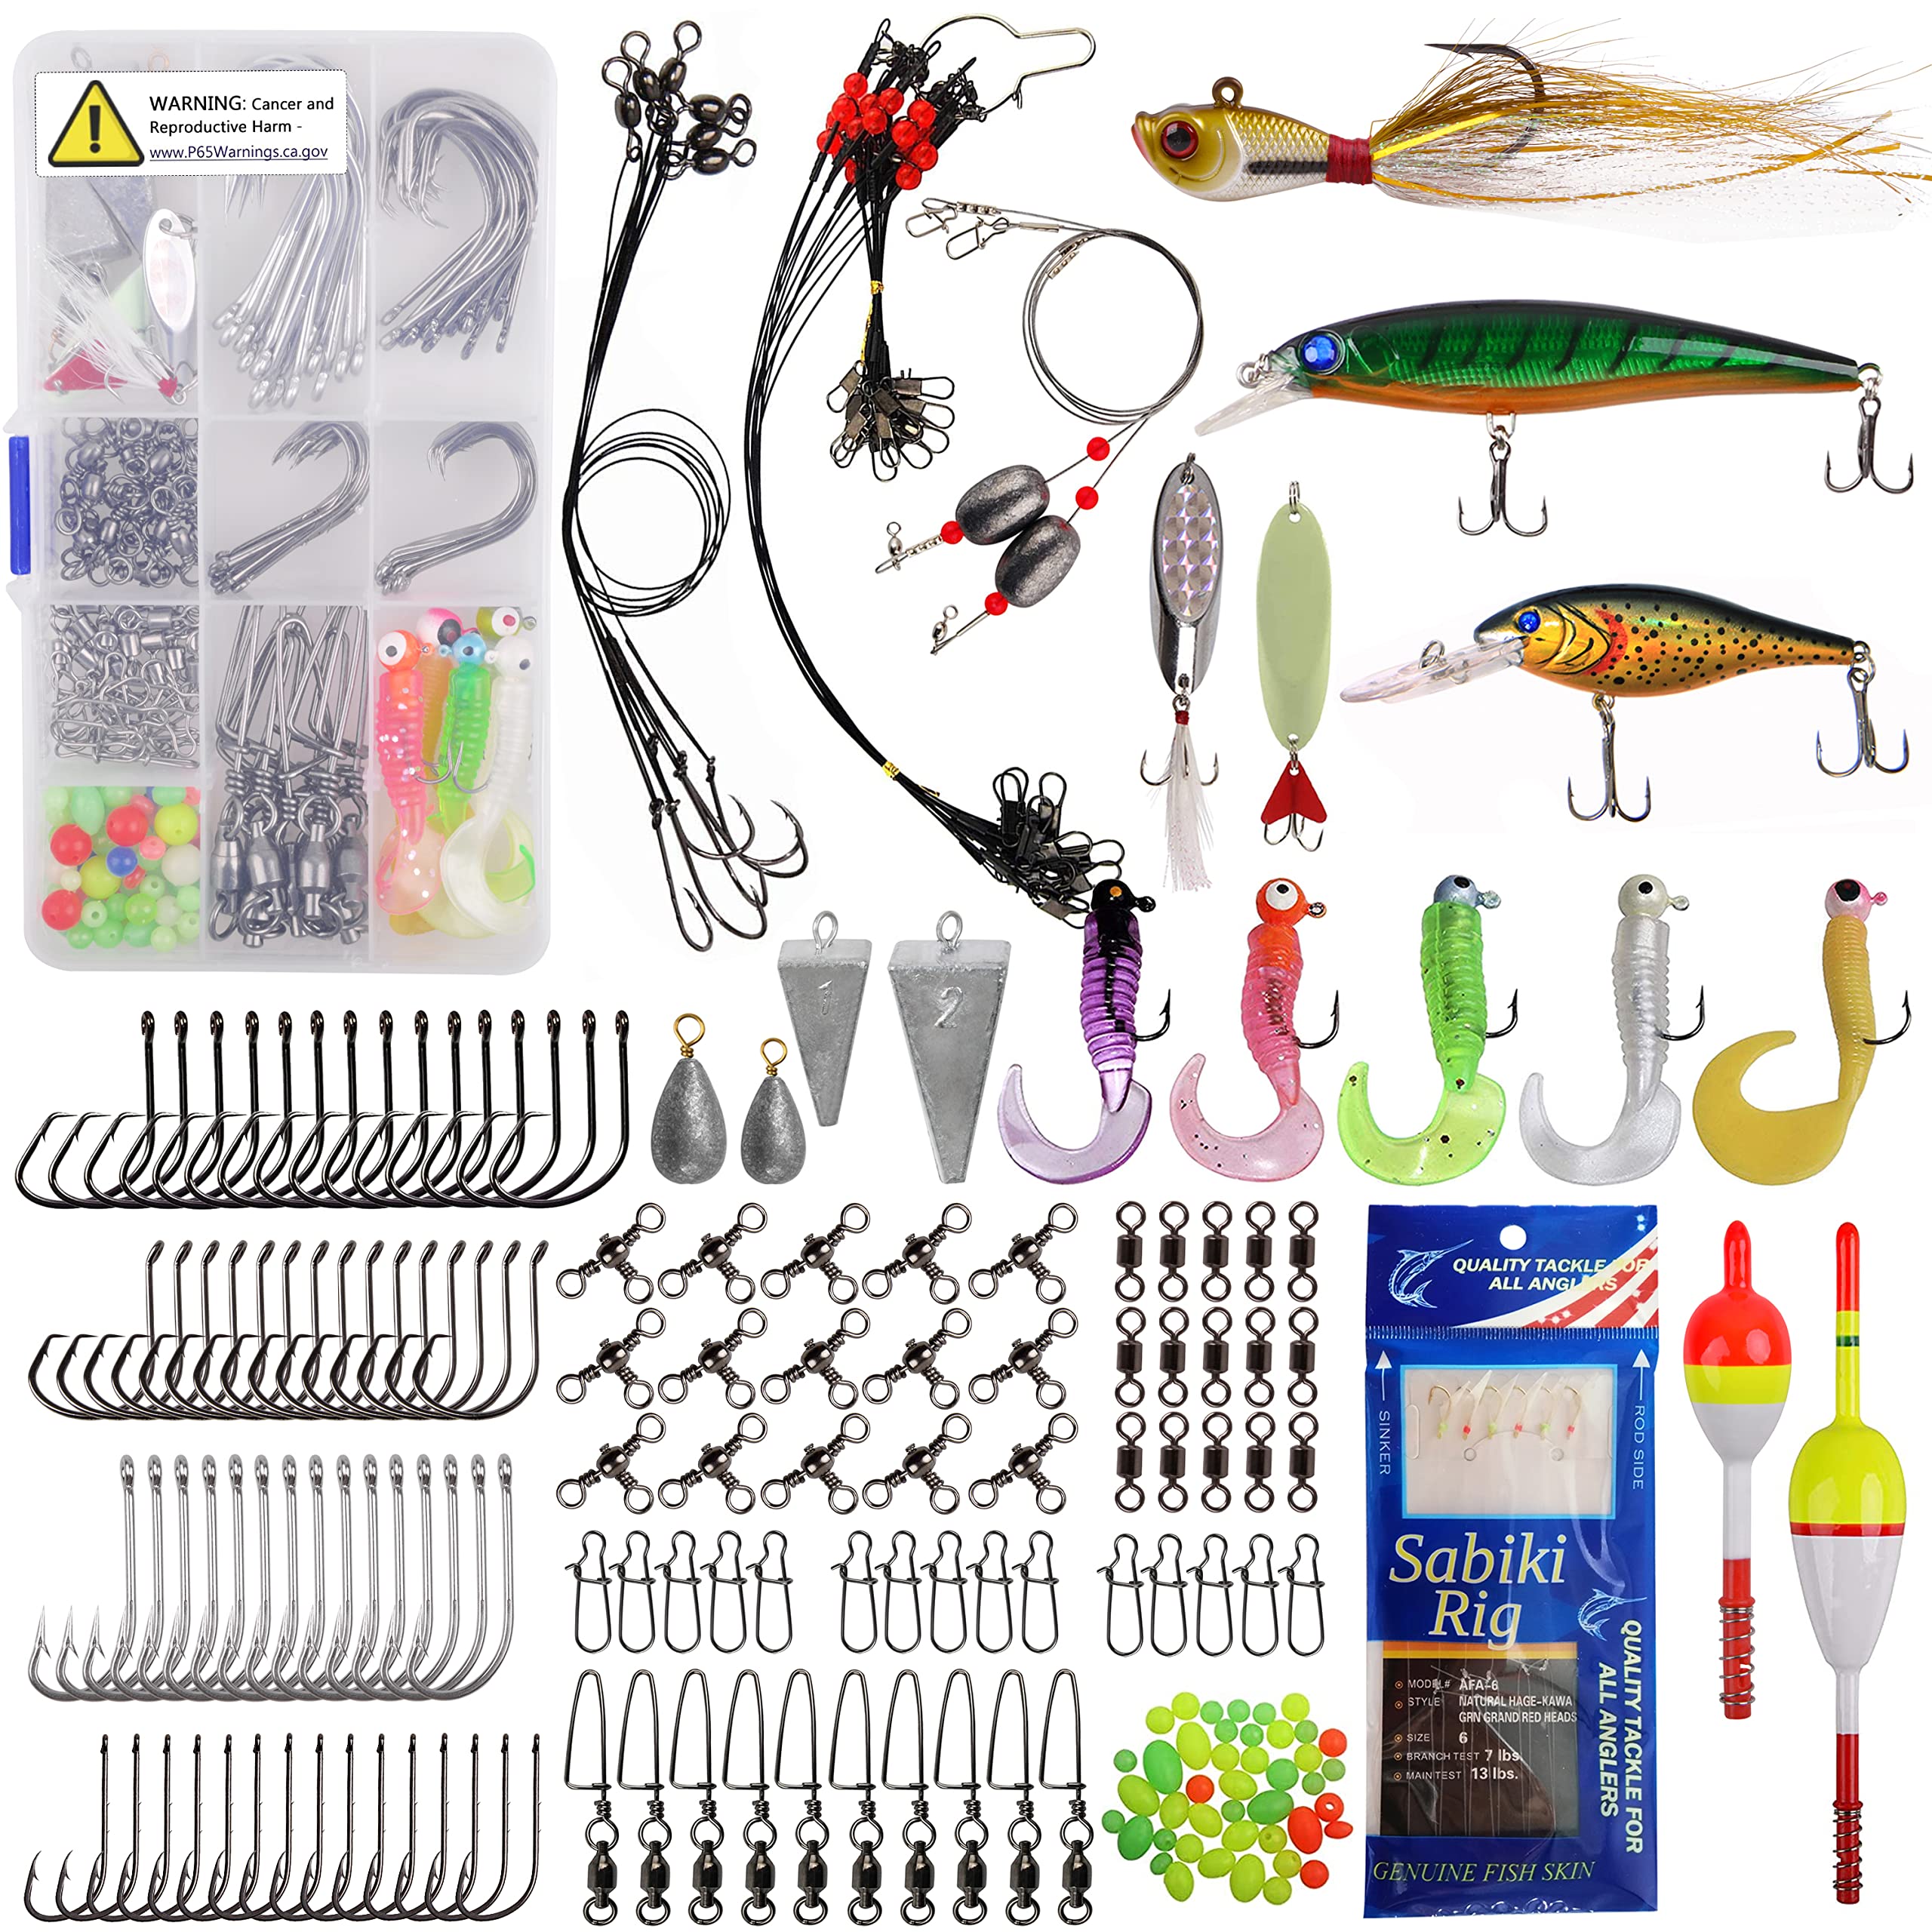 20pcs/60pcs/100pcs Fishing Line Sinker Slides Rig Sinker Weights Connector  Stainless Steel Pins Fishing Accessories Tools